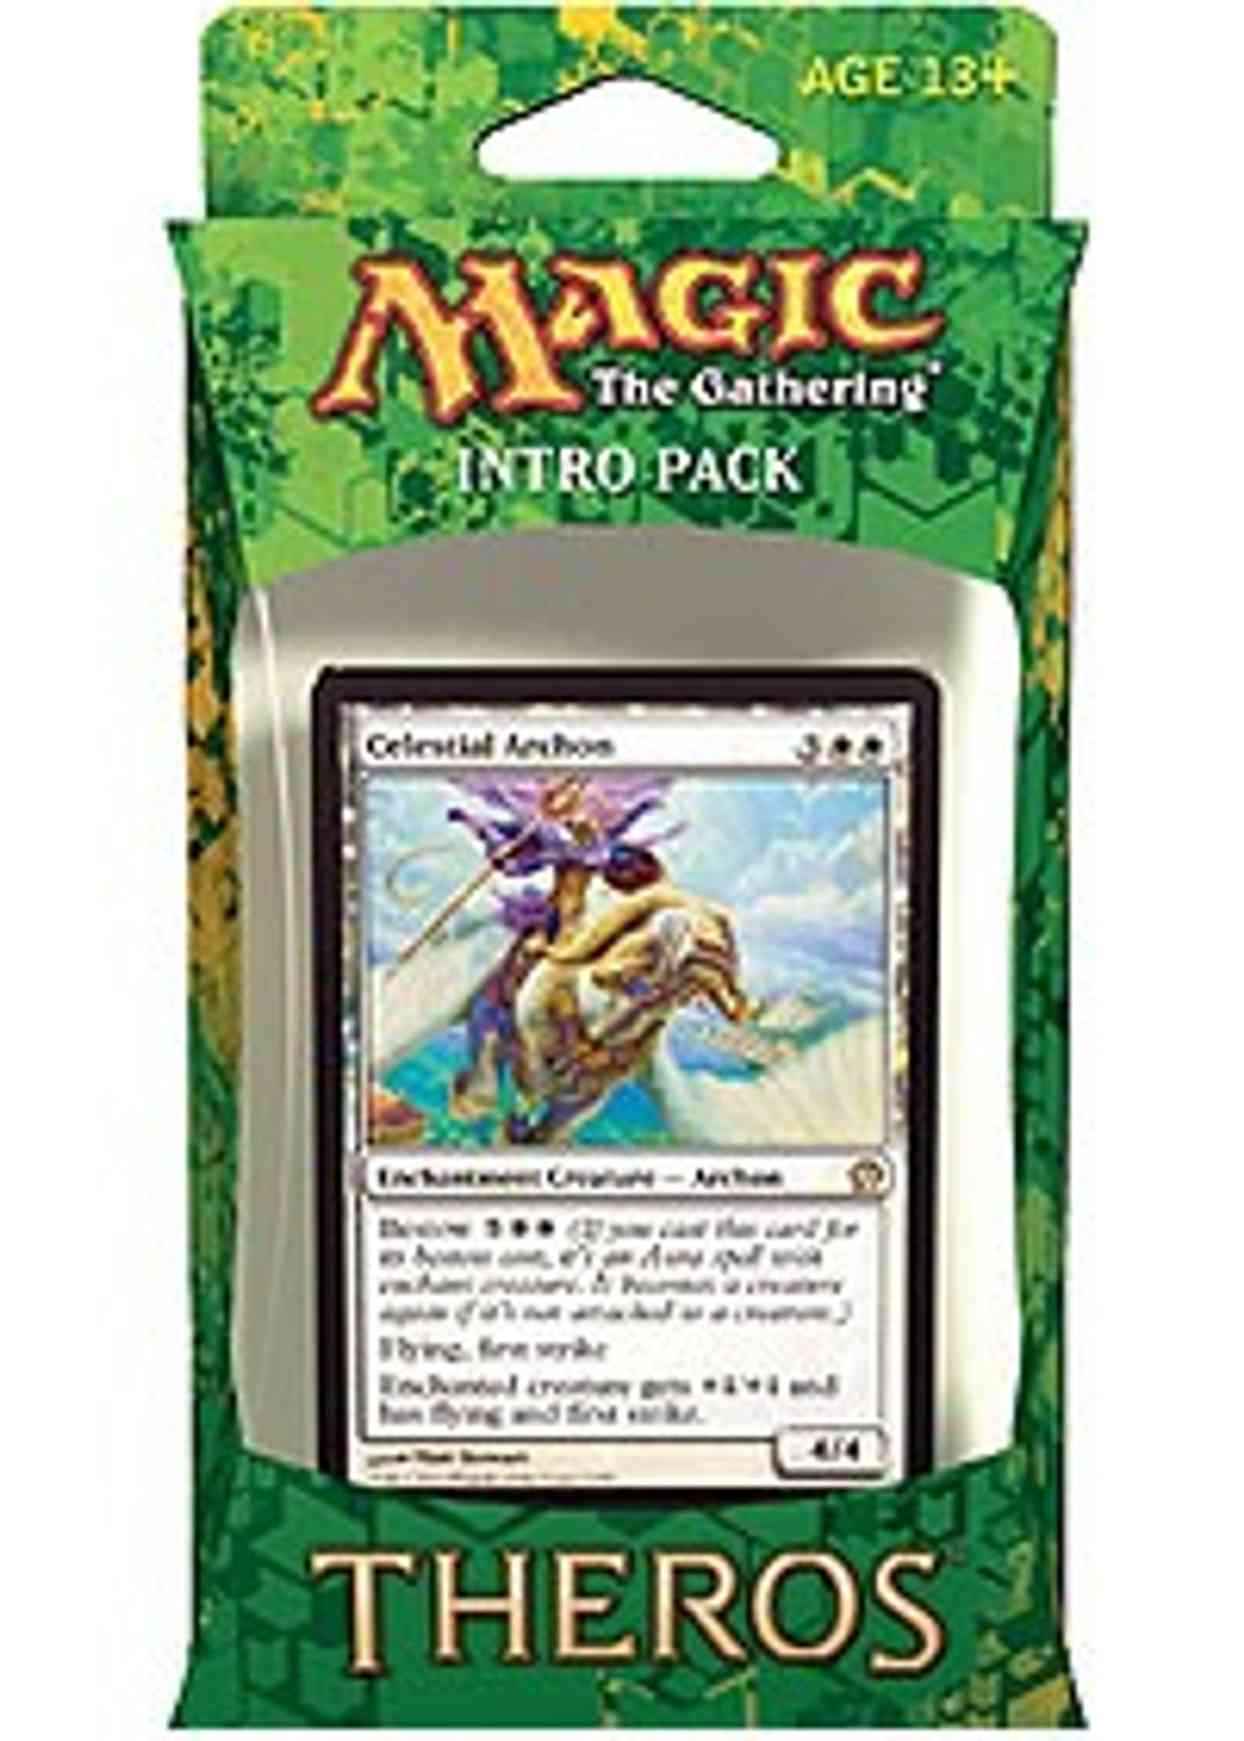 Theros - Intro Pack - Celestial Archon magic card front